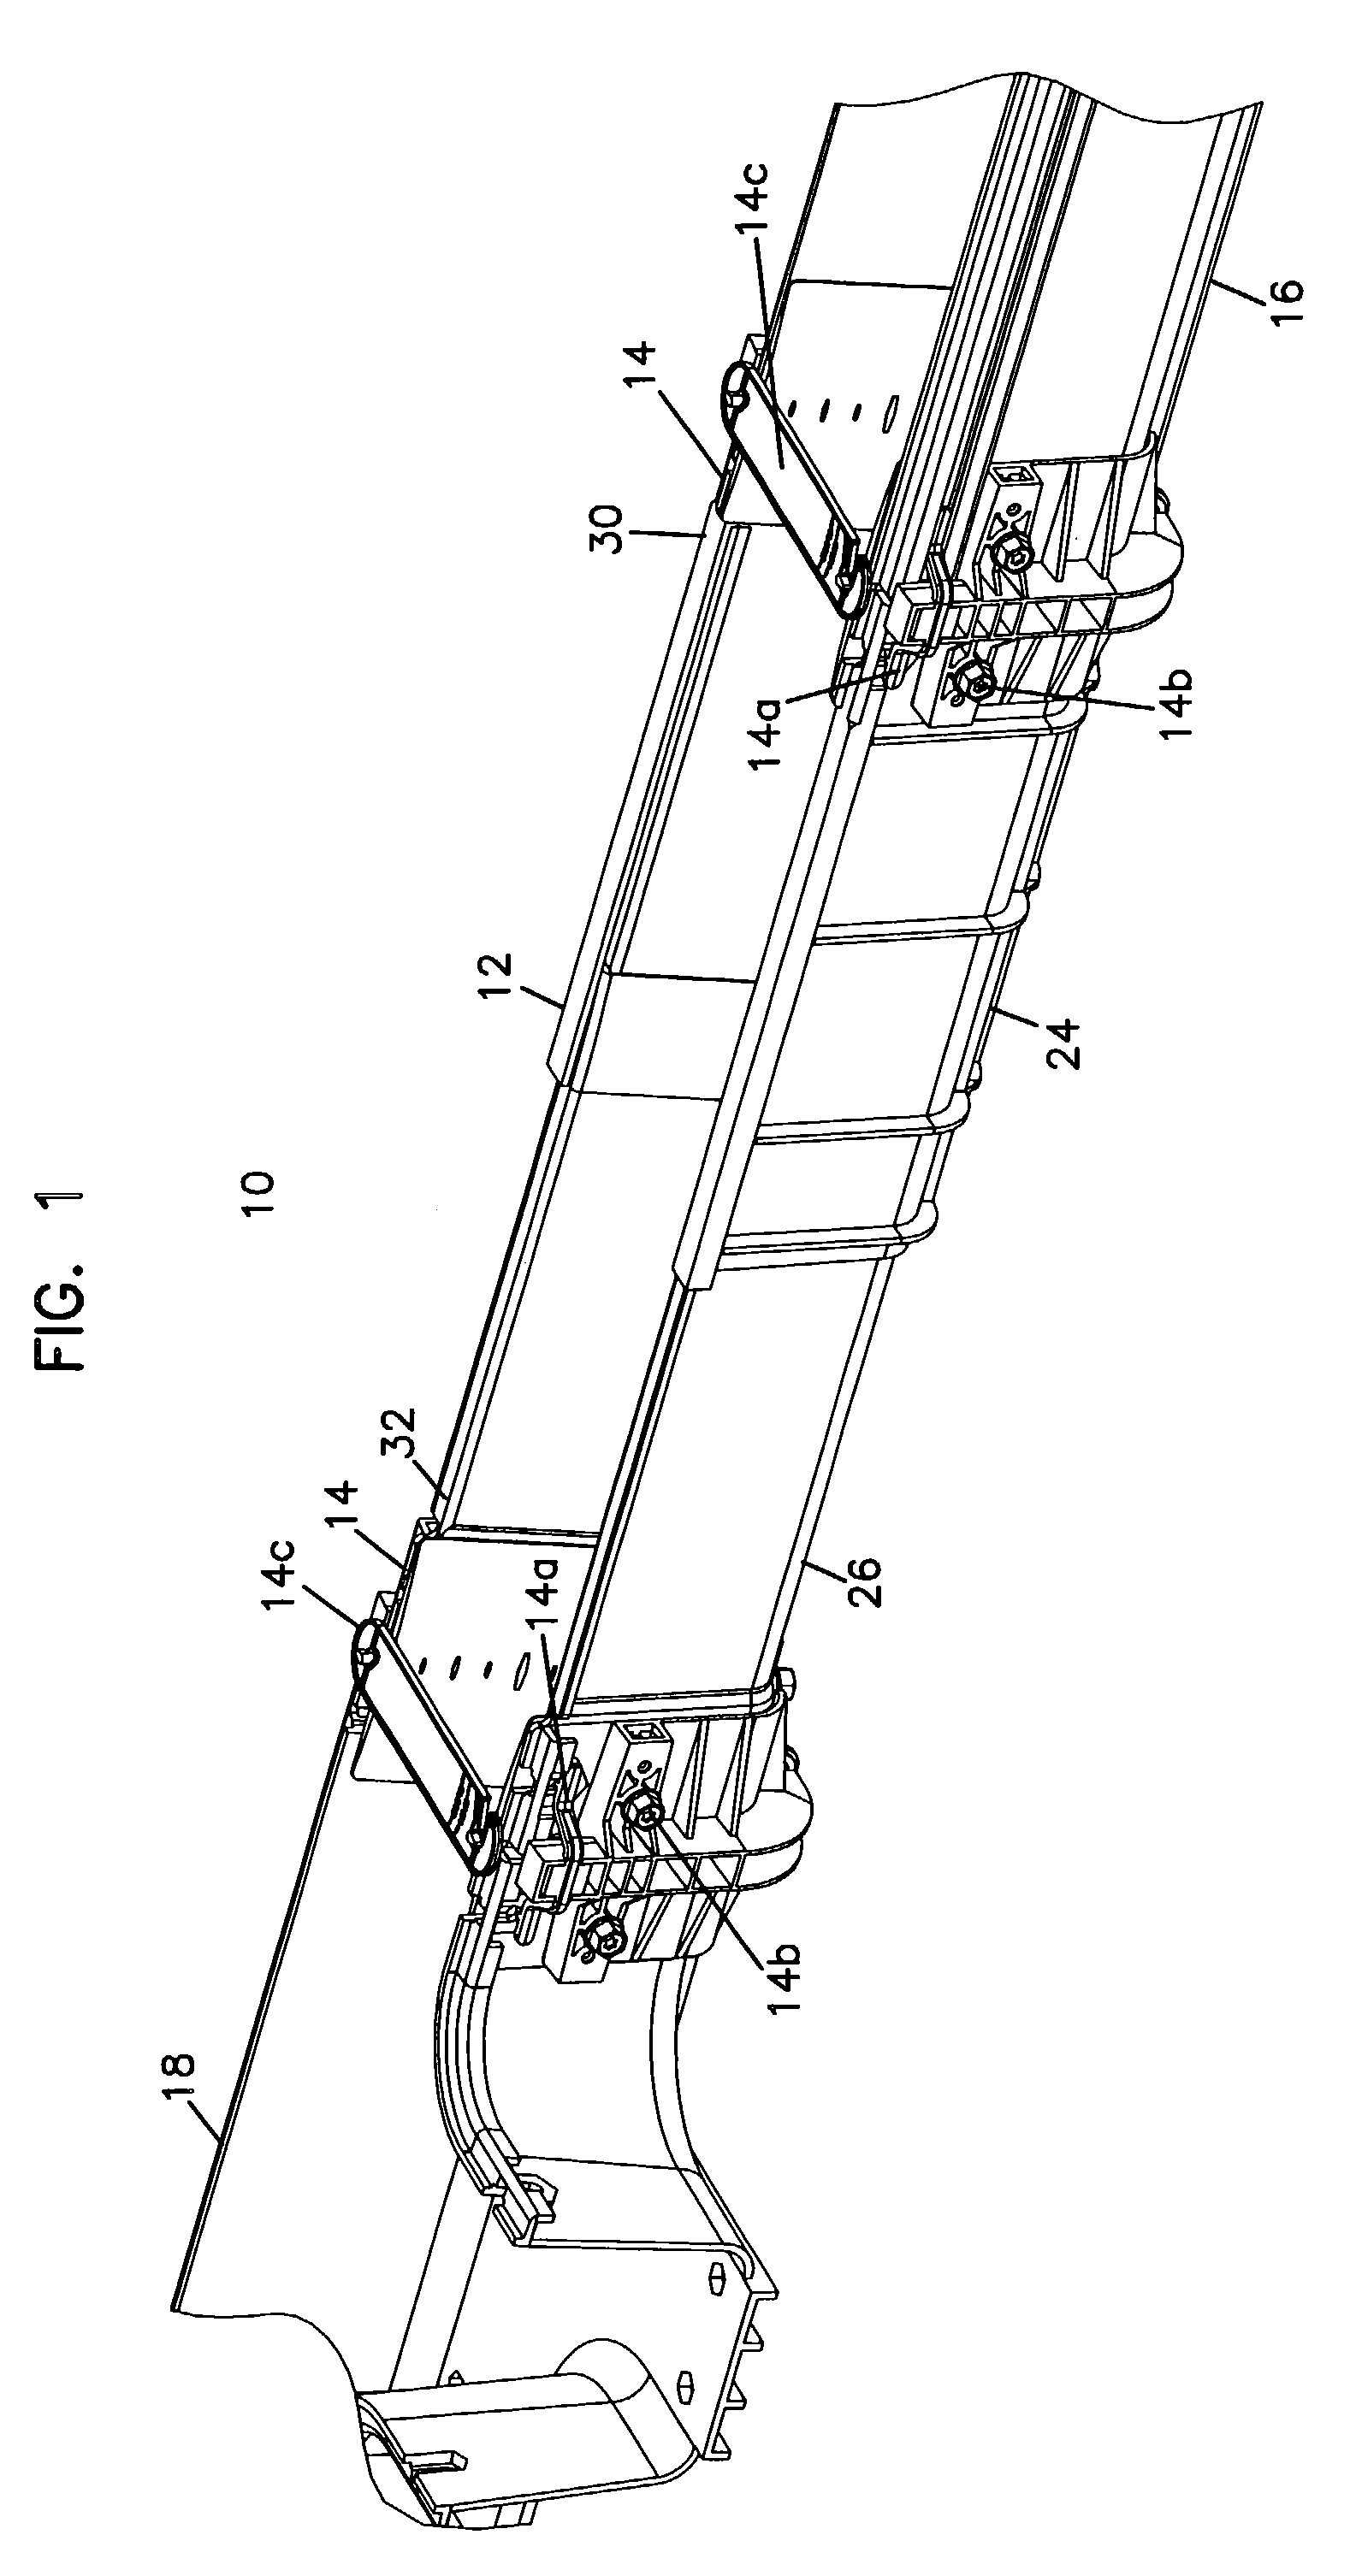 Method of assembling a cable routing system